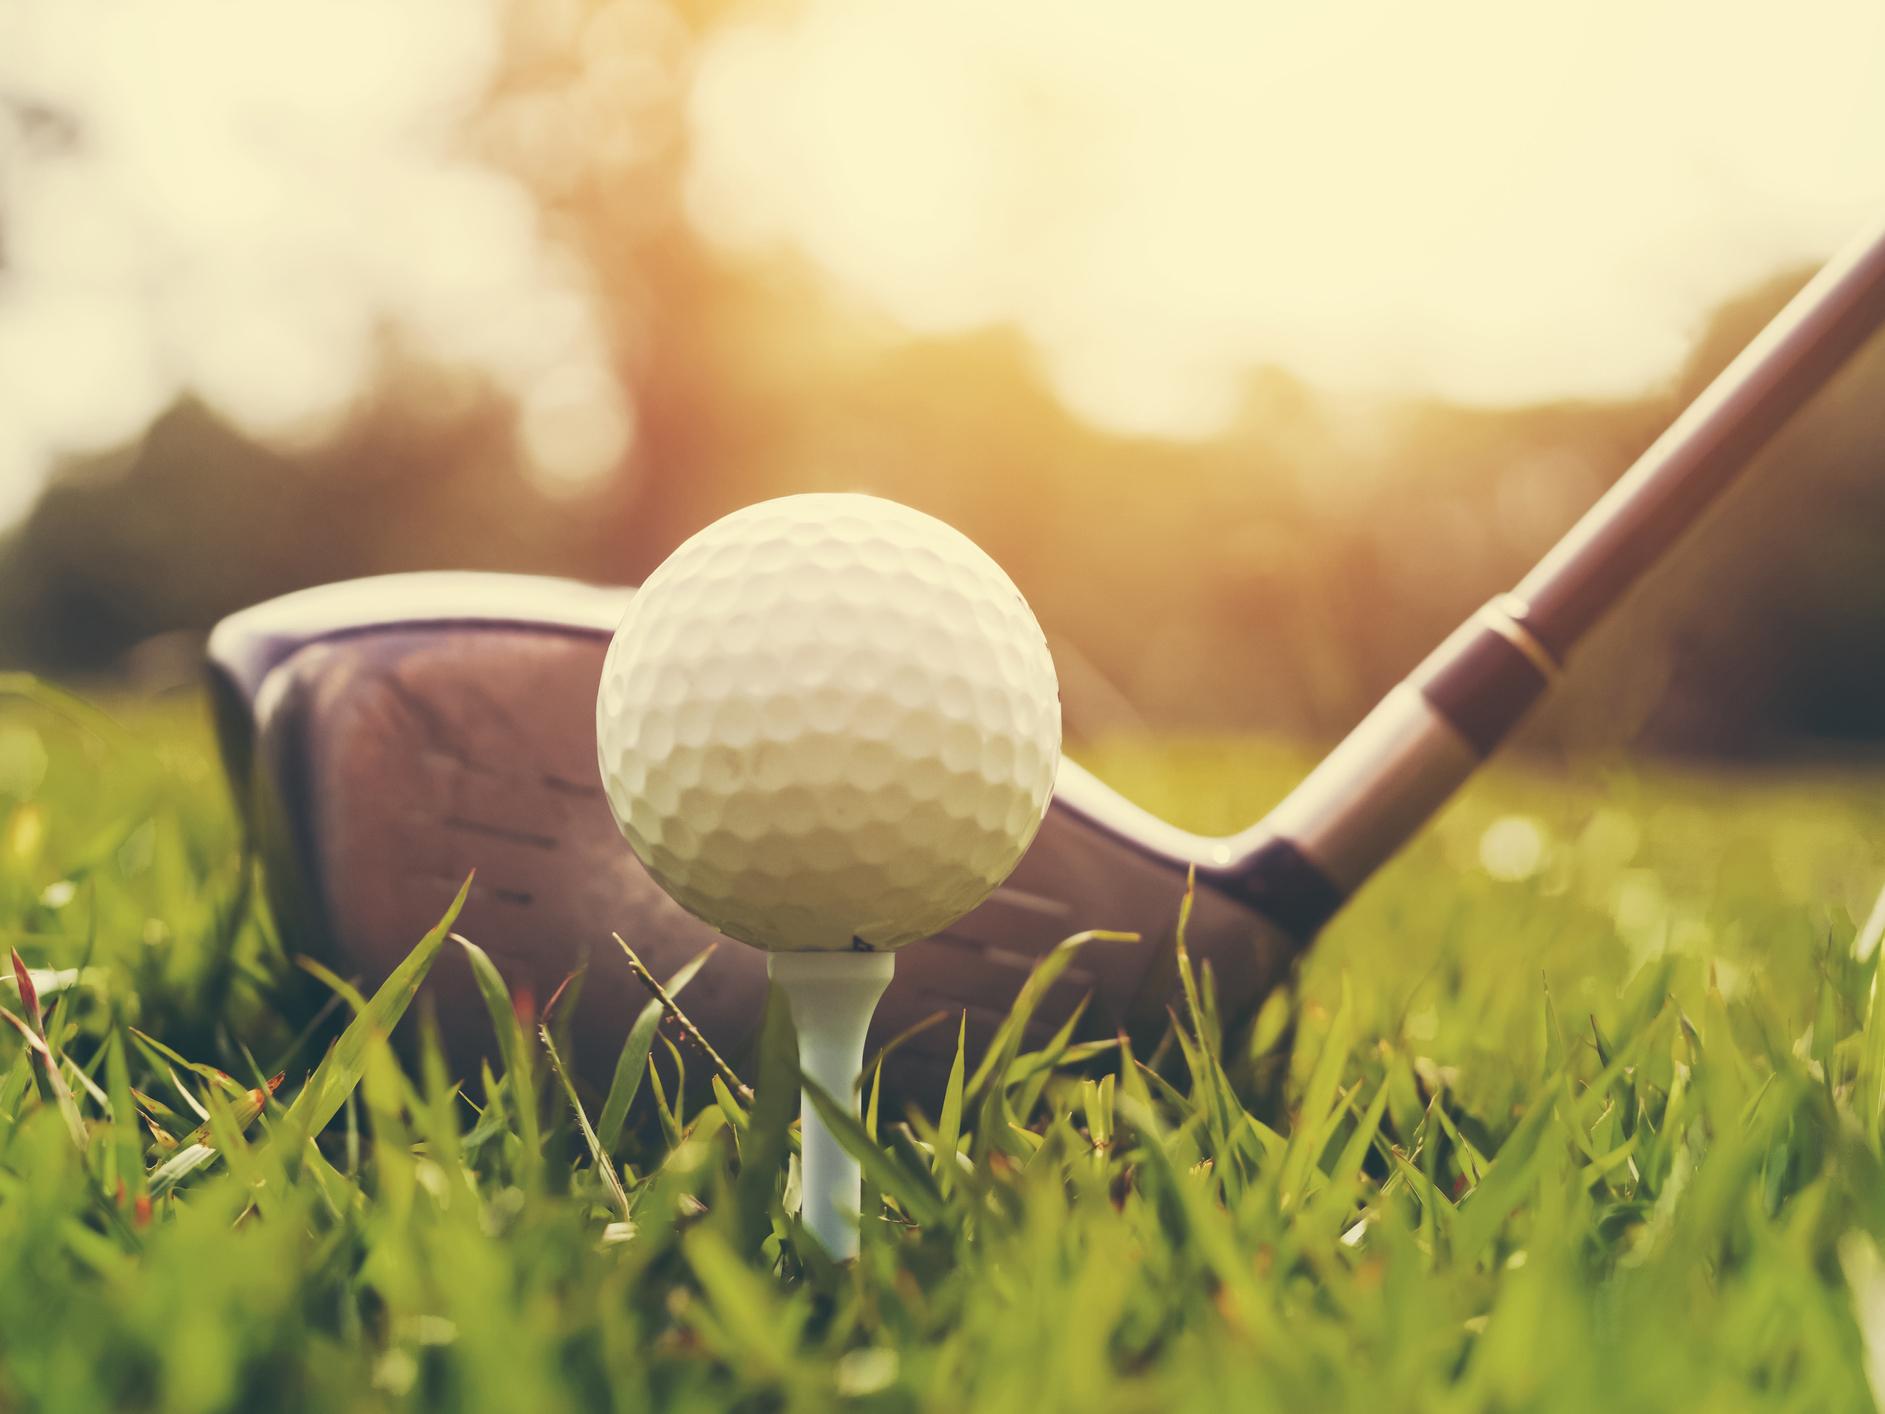 Why golfers who tee off regularly could live up to 5 years longer